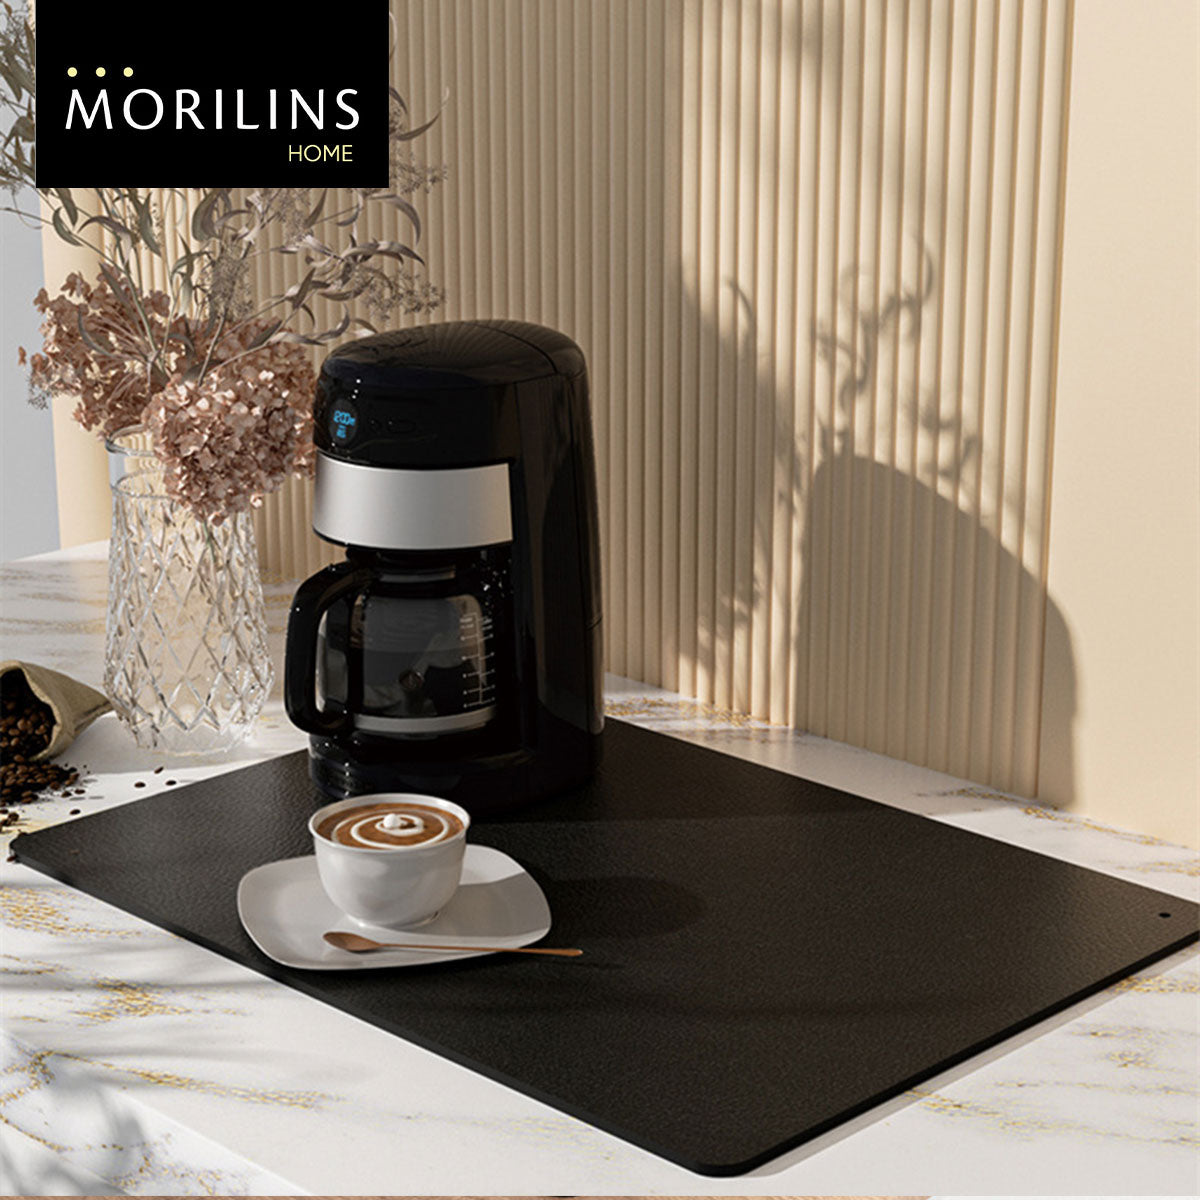 [Morilins Home] Soft Diatomaceous Earth Absorbent Mat for Kitchen Countertops - Fast Drying, Non-Slip, mould-resistant, 40x50cm - Bloom Concept